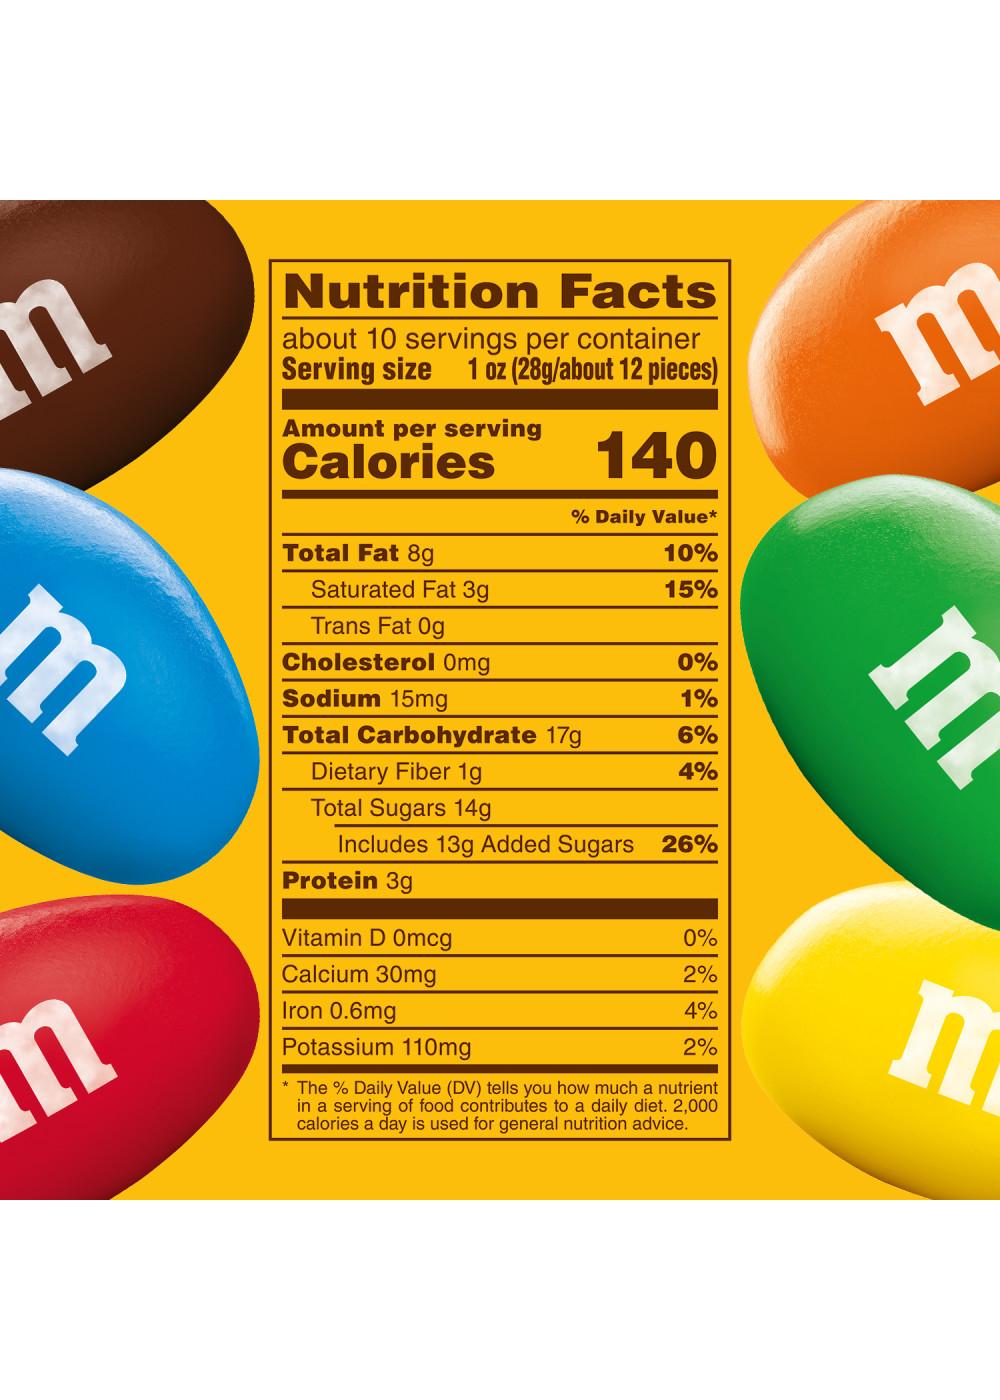 M&M'S Fudge Brownie Chocolate Candy - Sharing Size - Shop Candy at H-E-B